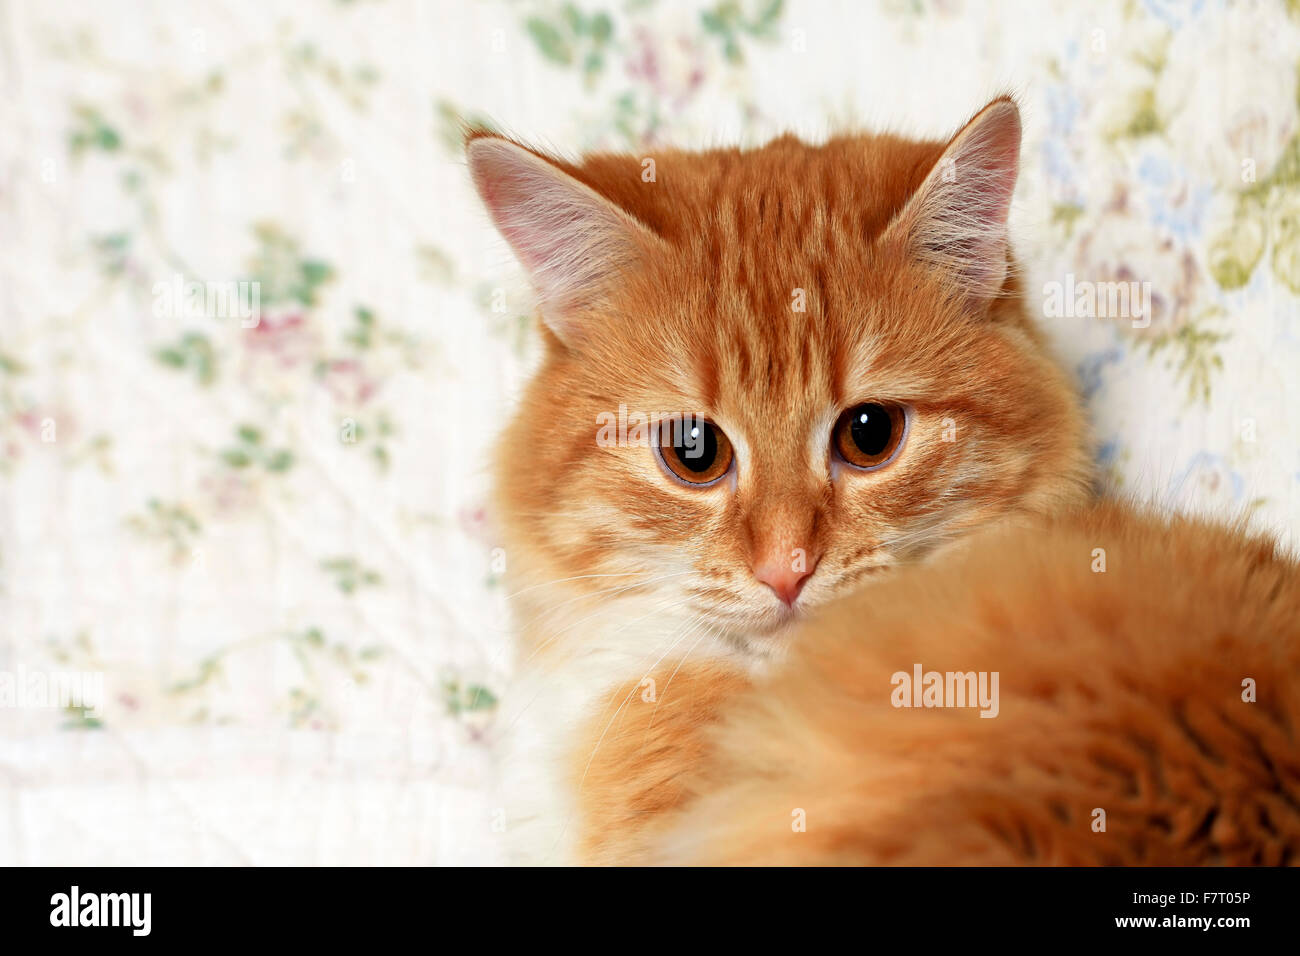 Portrait of a young red-haired cat Stock Photo